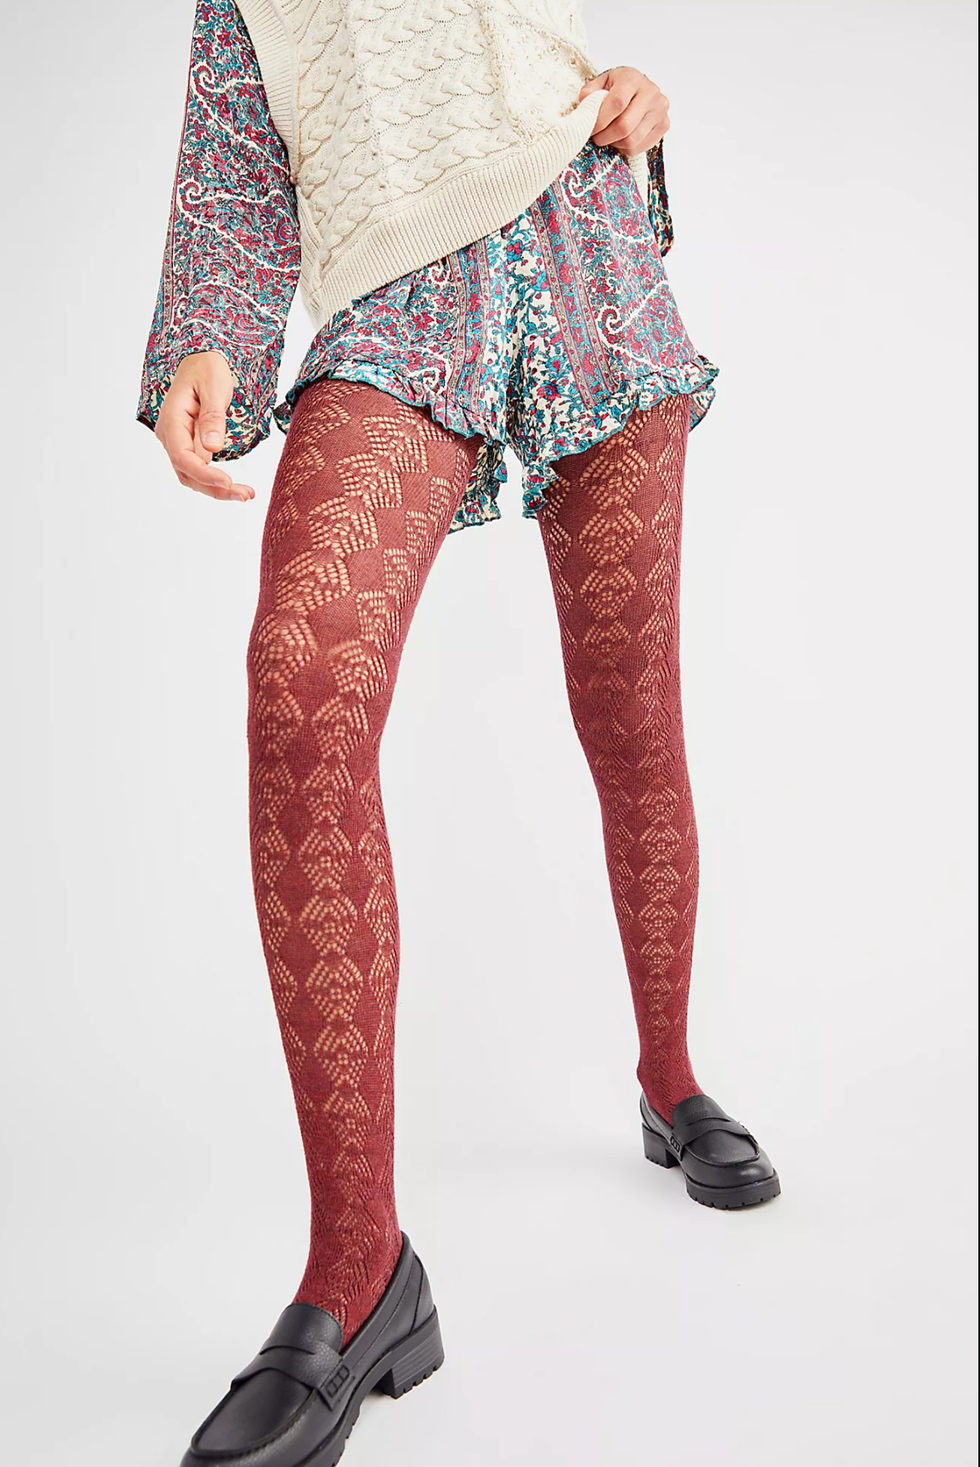 Colorful Patterned Tights London for Women Tights Available in